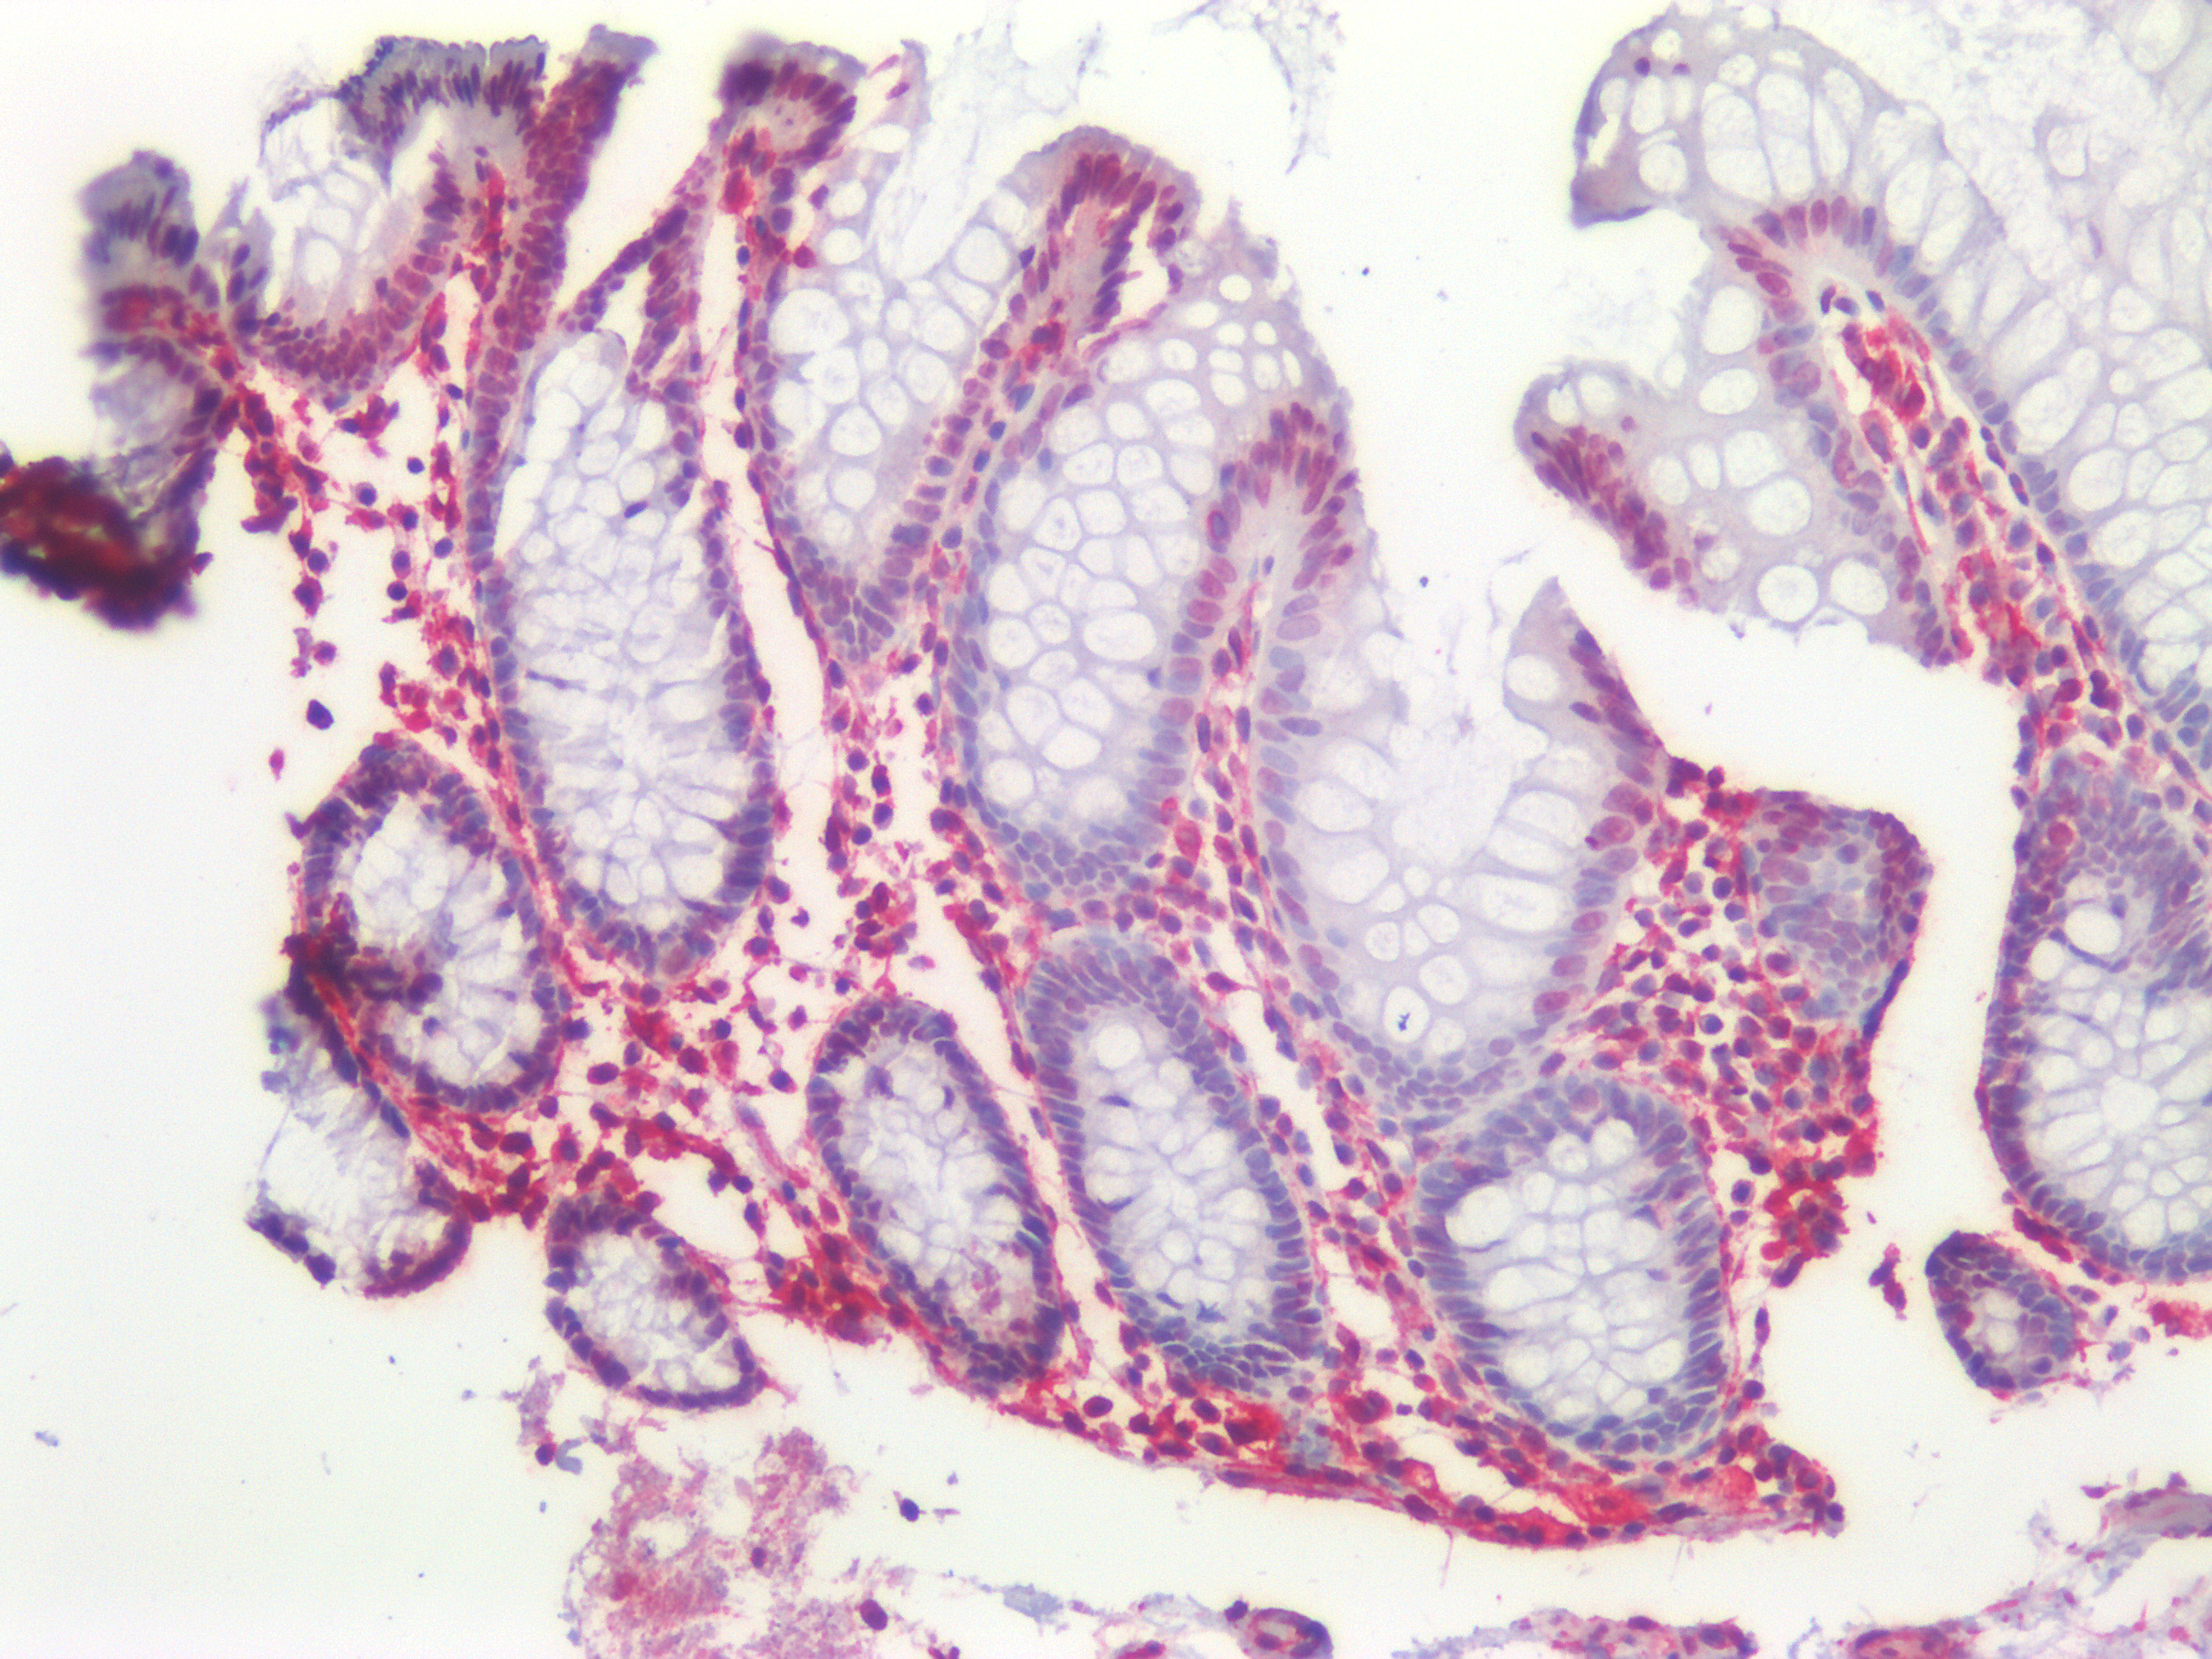 Figure 6. Immunostaining of human paraffin embedded tissue sections of human colon with MUB1904P (diluted 1:200), showing the specific pattern of vimentin in the mesenchymal cell types, such as fibroblasts in the connective tissue, and endothelial cells in blood vessels. As expected, no reactivity is seen in the epithelial cell compartment.